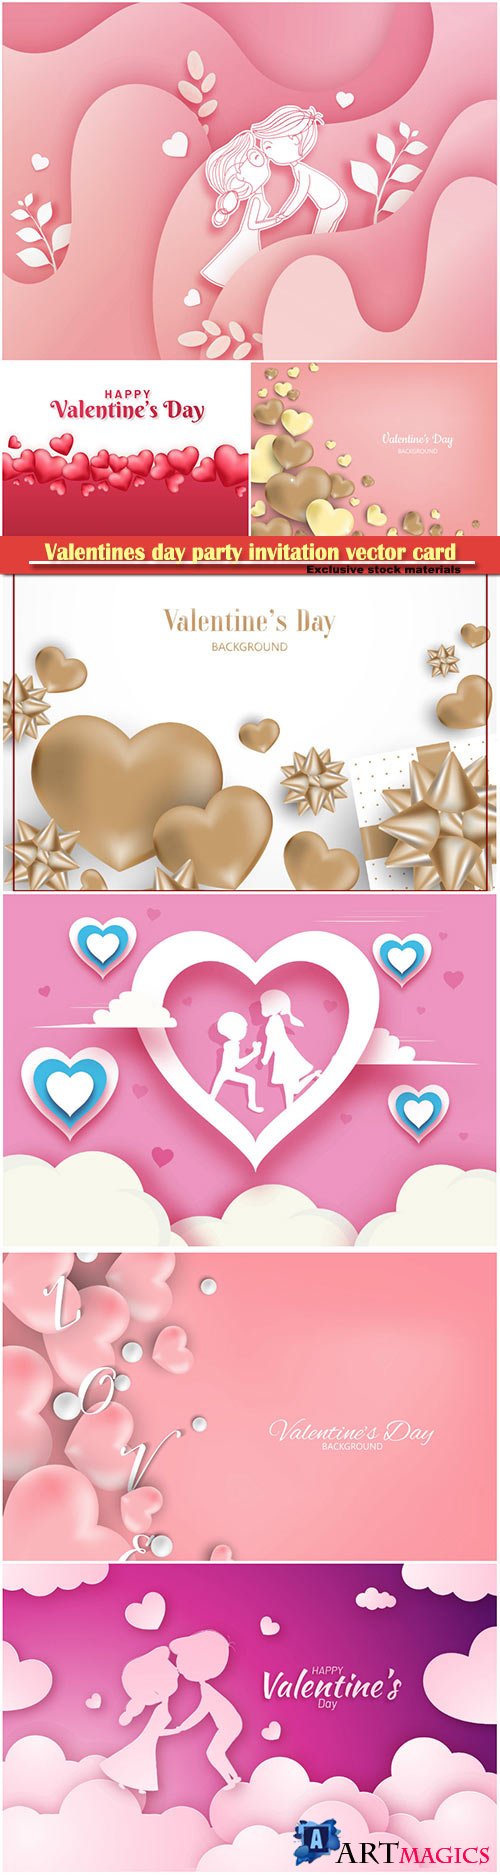 Valentines day party invitation vector card # 42